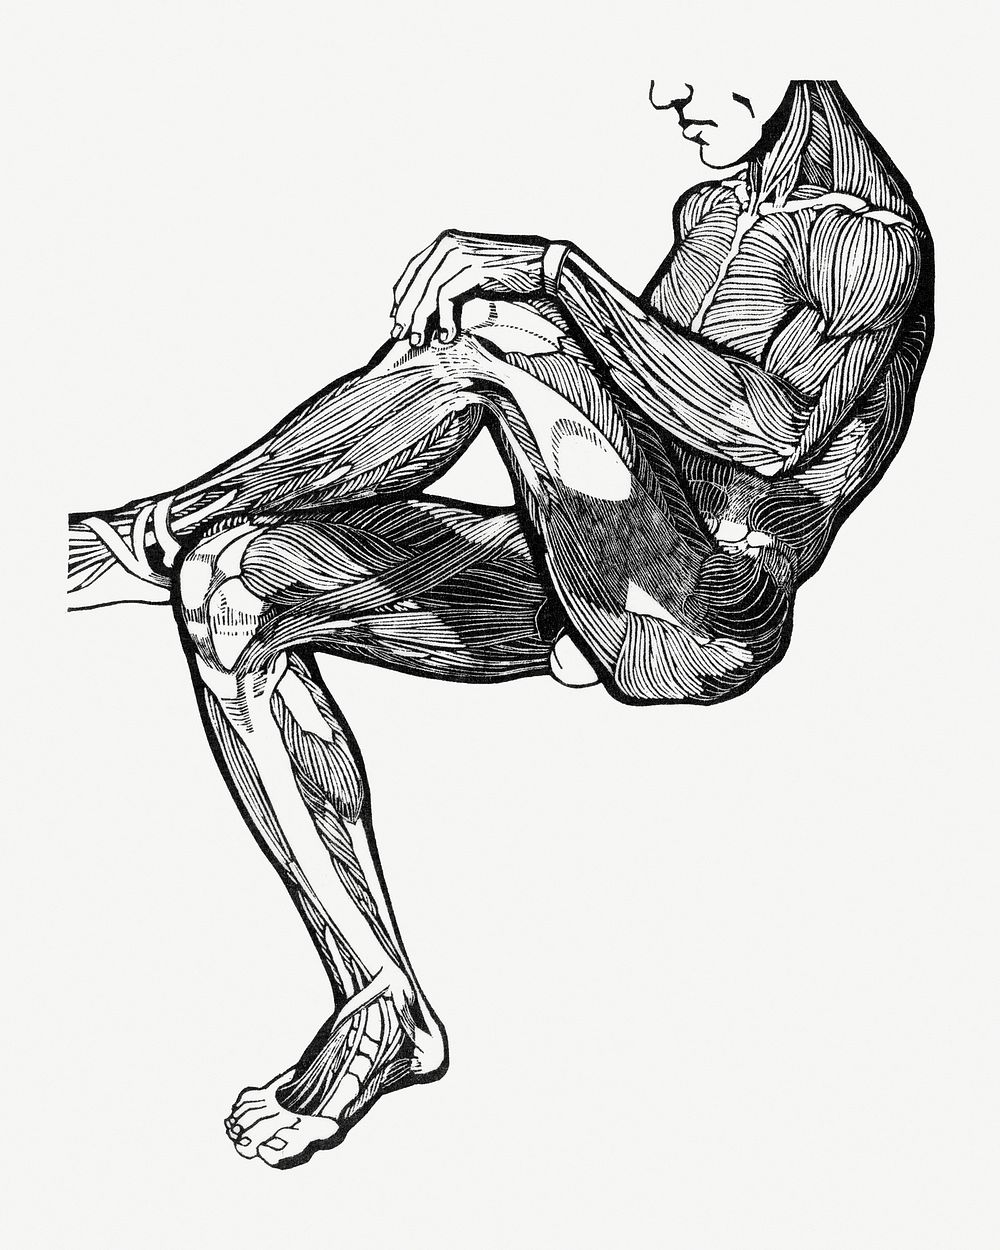 Human anatomy psd with leg and arm muscles print, remixed from artworks by Reijer Stolk